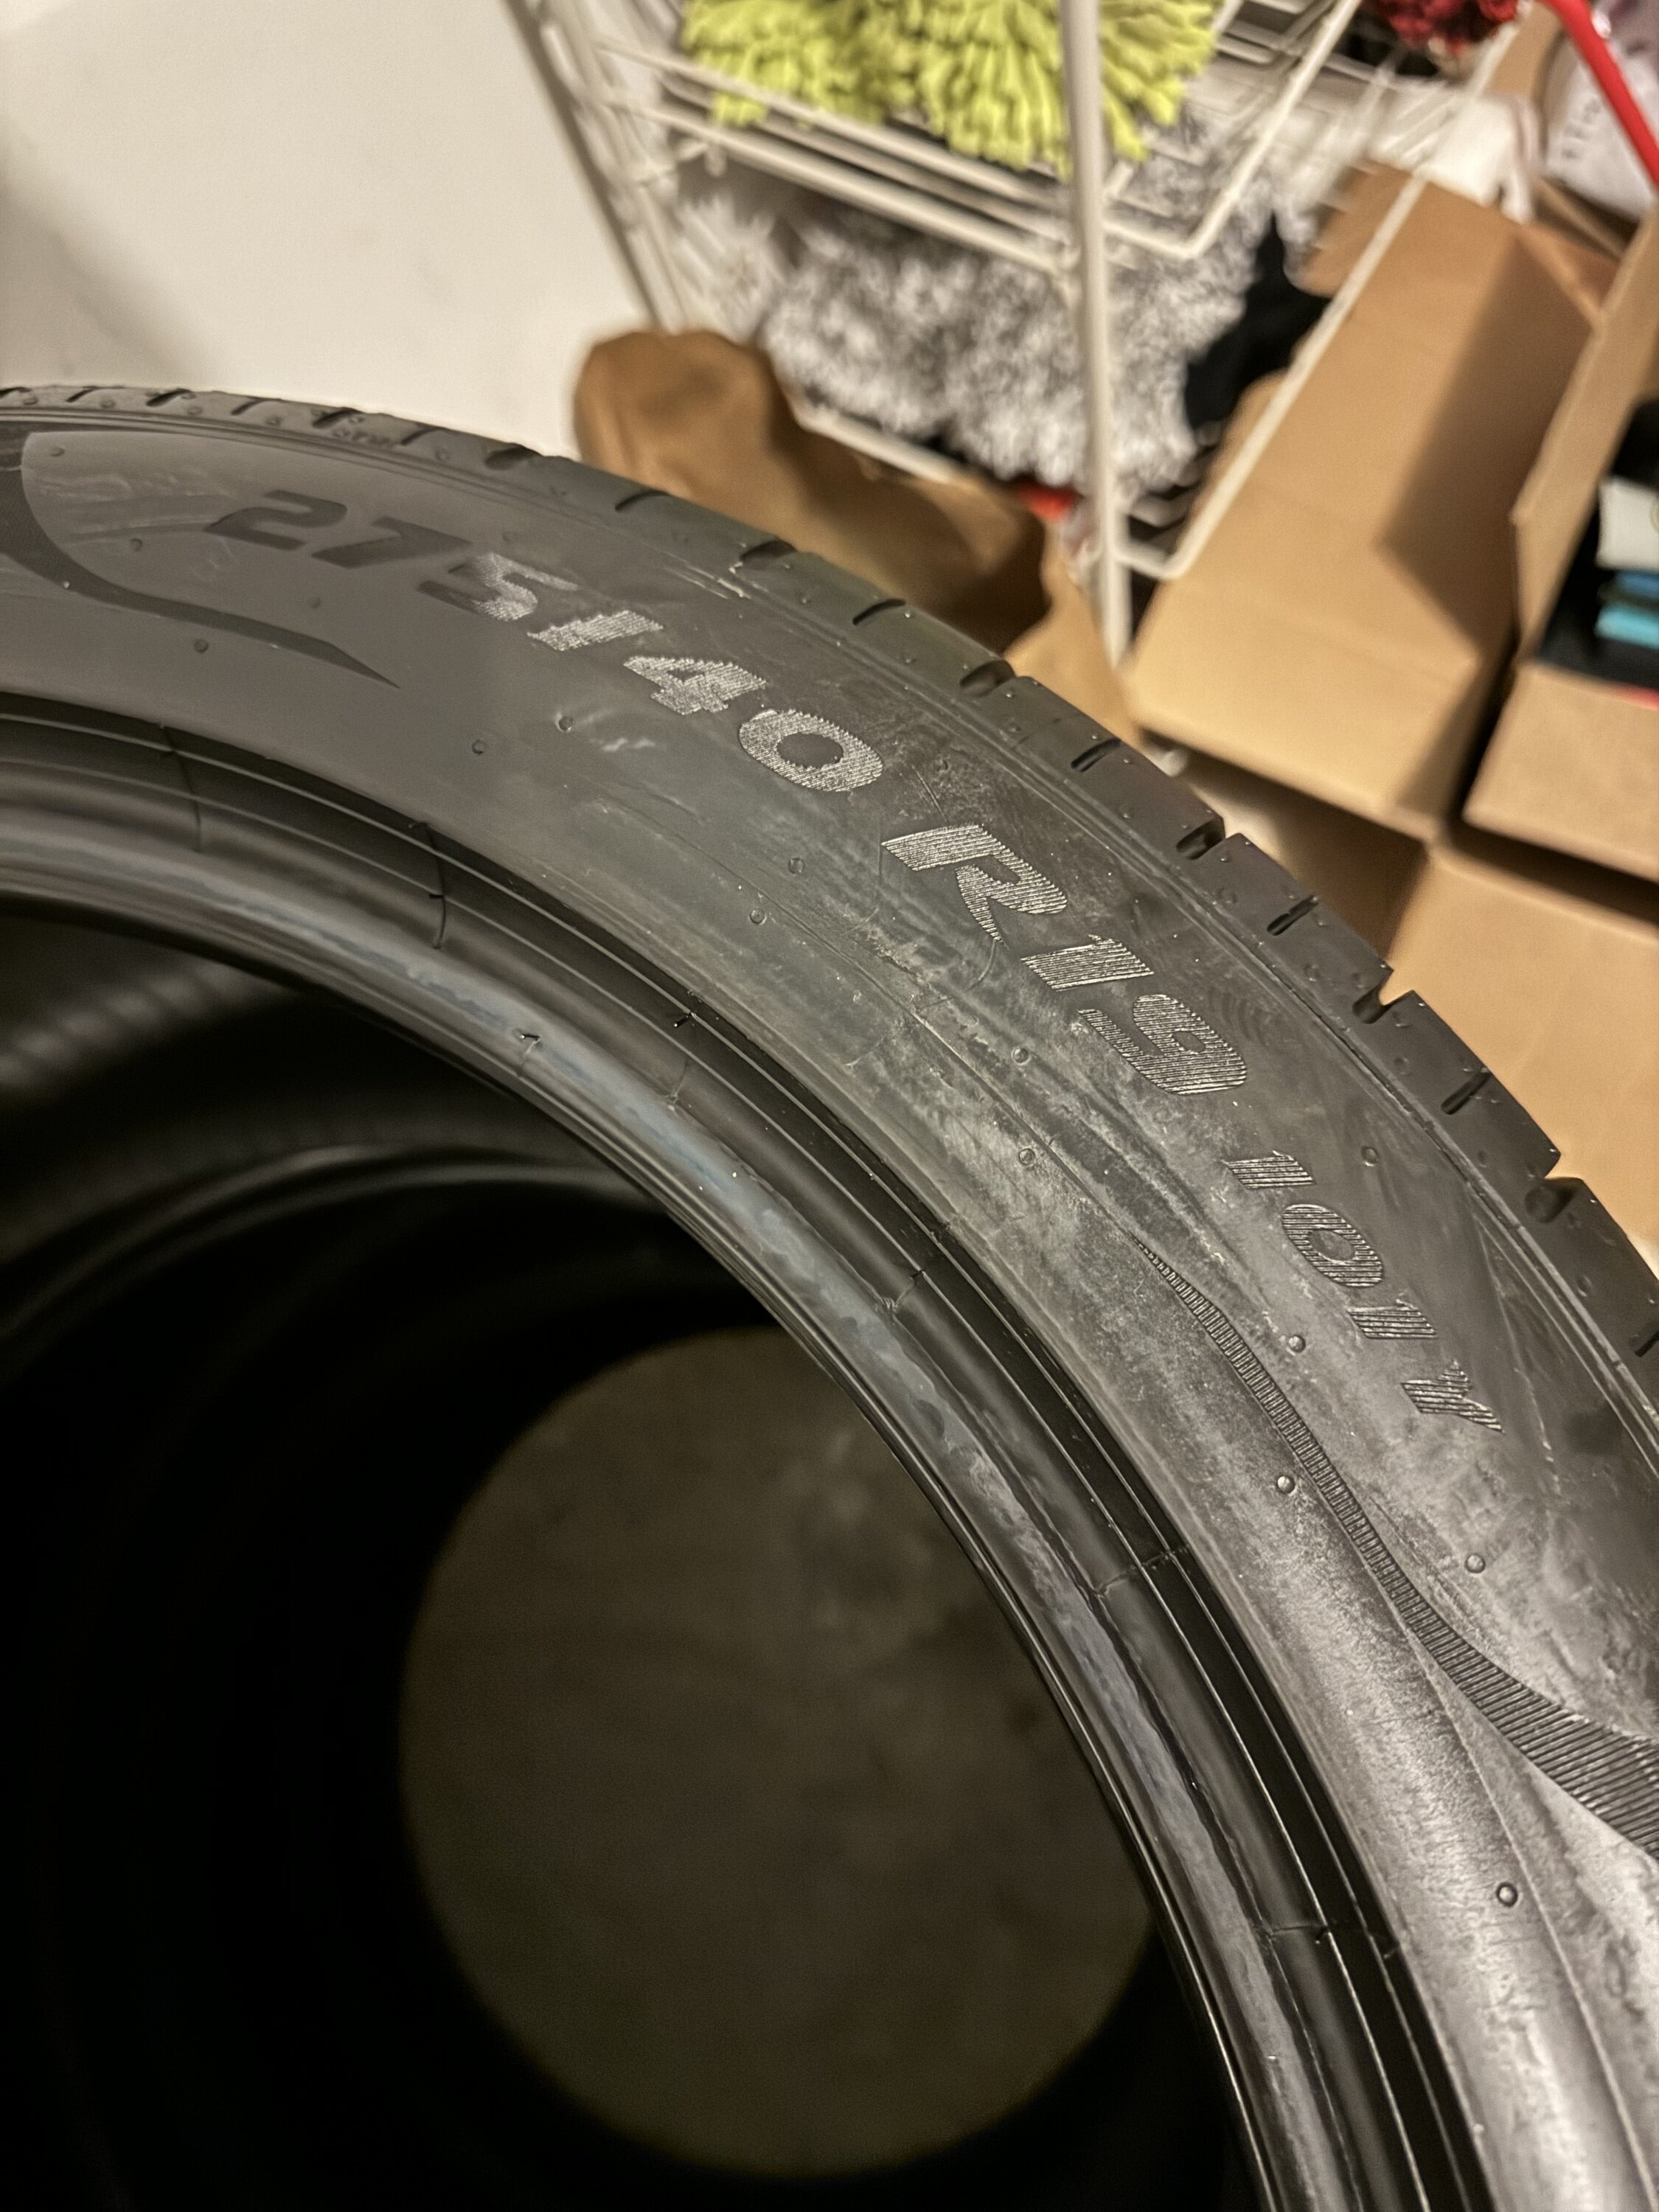 S650 Mustang Pirelli P Zero tires from my Dark Horse(delivery miles) IMG_0562